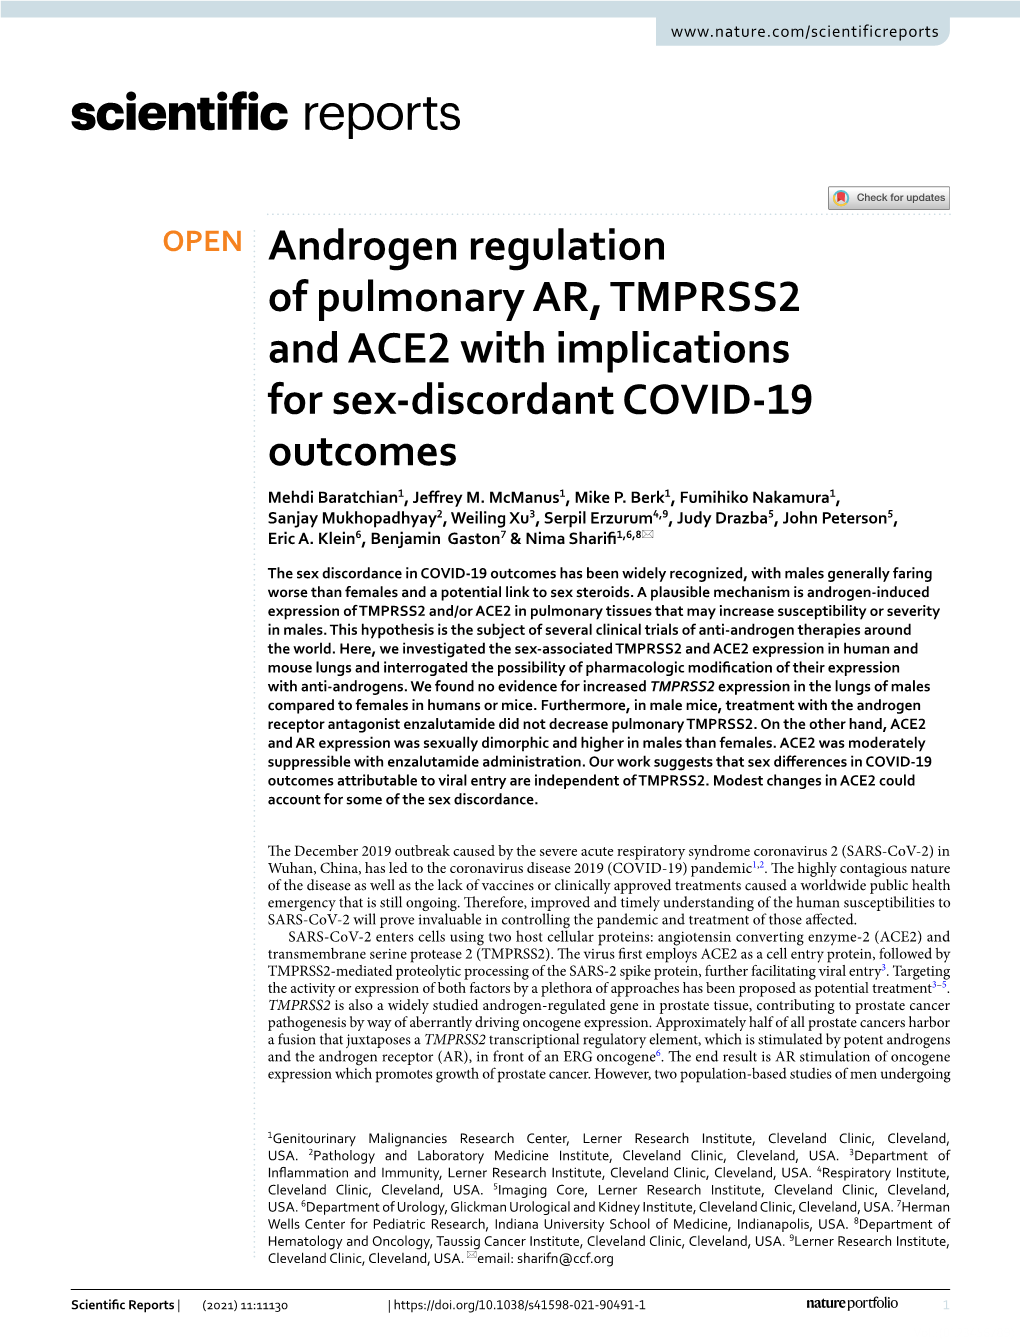 Androgen Regulation of Pulmonary AR, TMPRSS2 and ACE2 with Implications for Sex‑Discordant COVID‑19 Outcomes Mehdi Baratchian1, Jefrey M